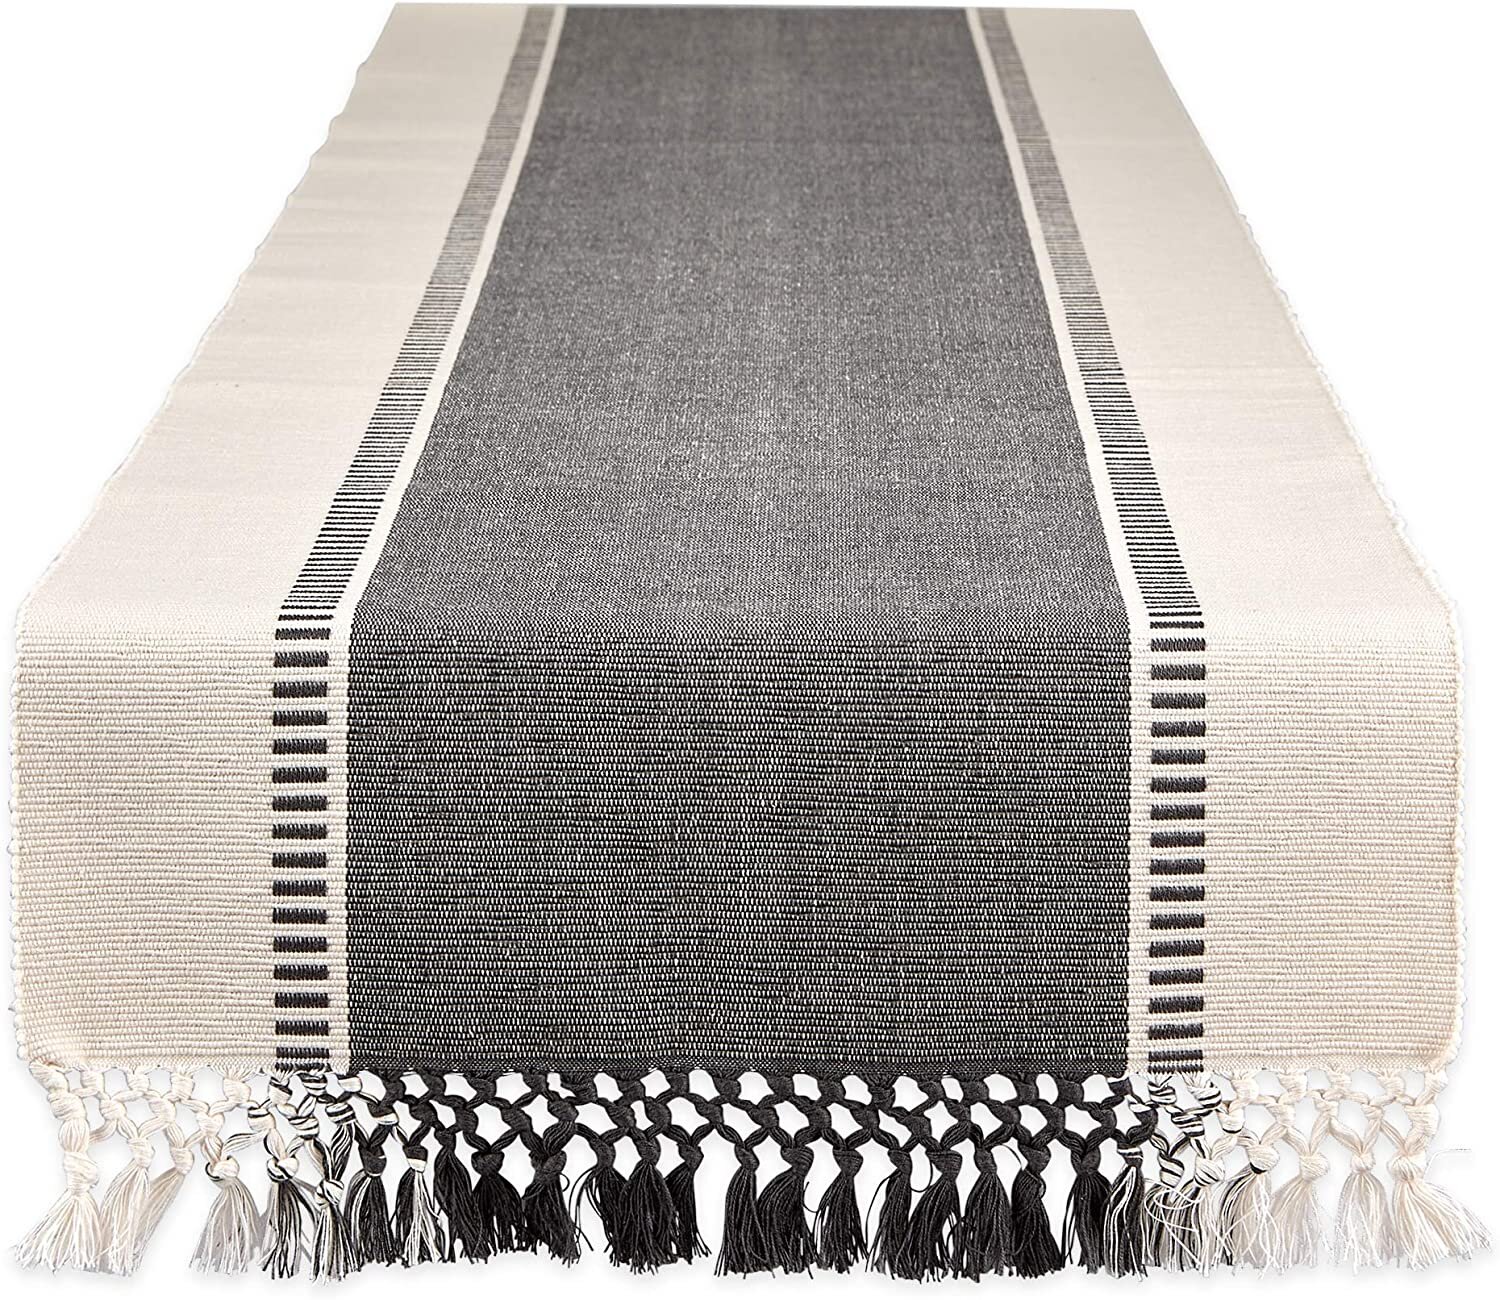 Dobby white and charcoal table runner with fringe edge